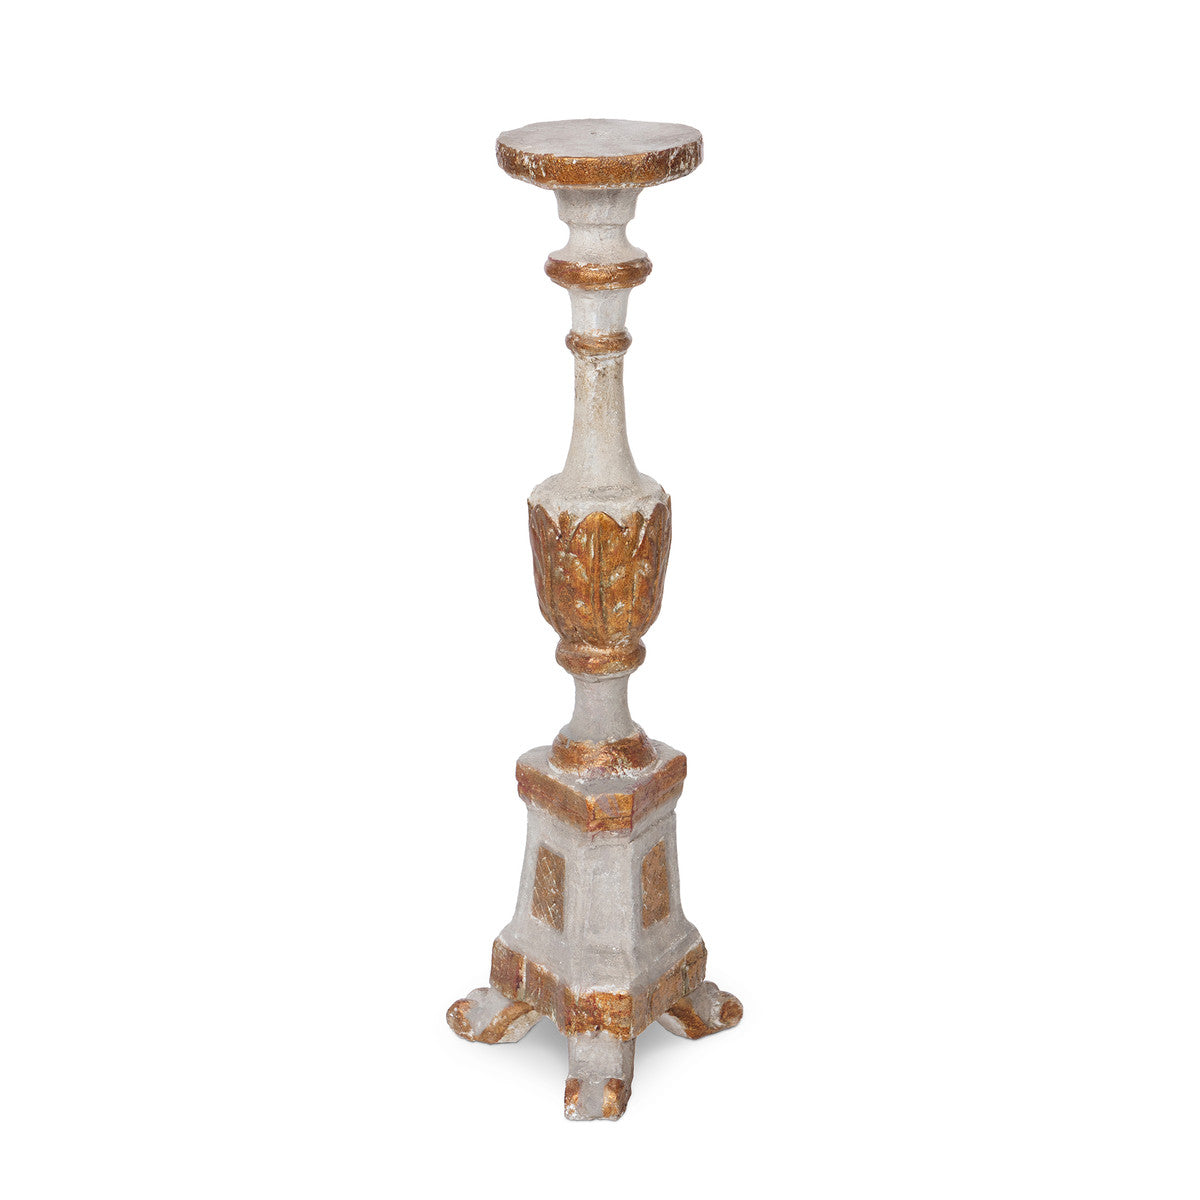 The Lola Candlestick